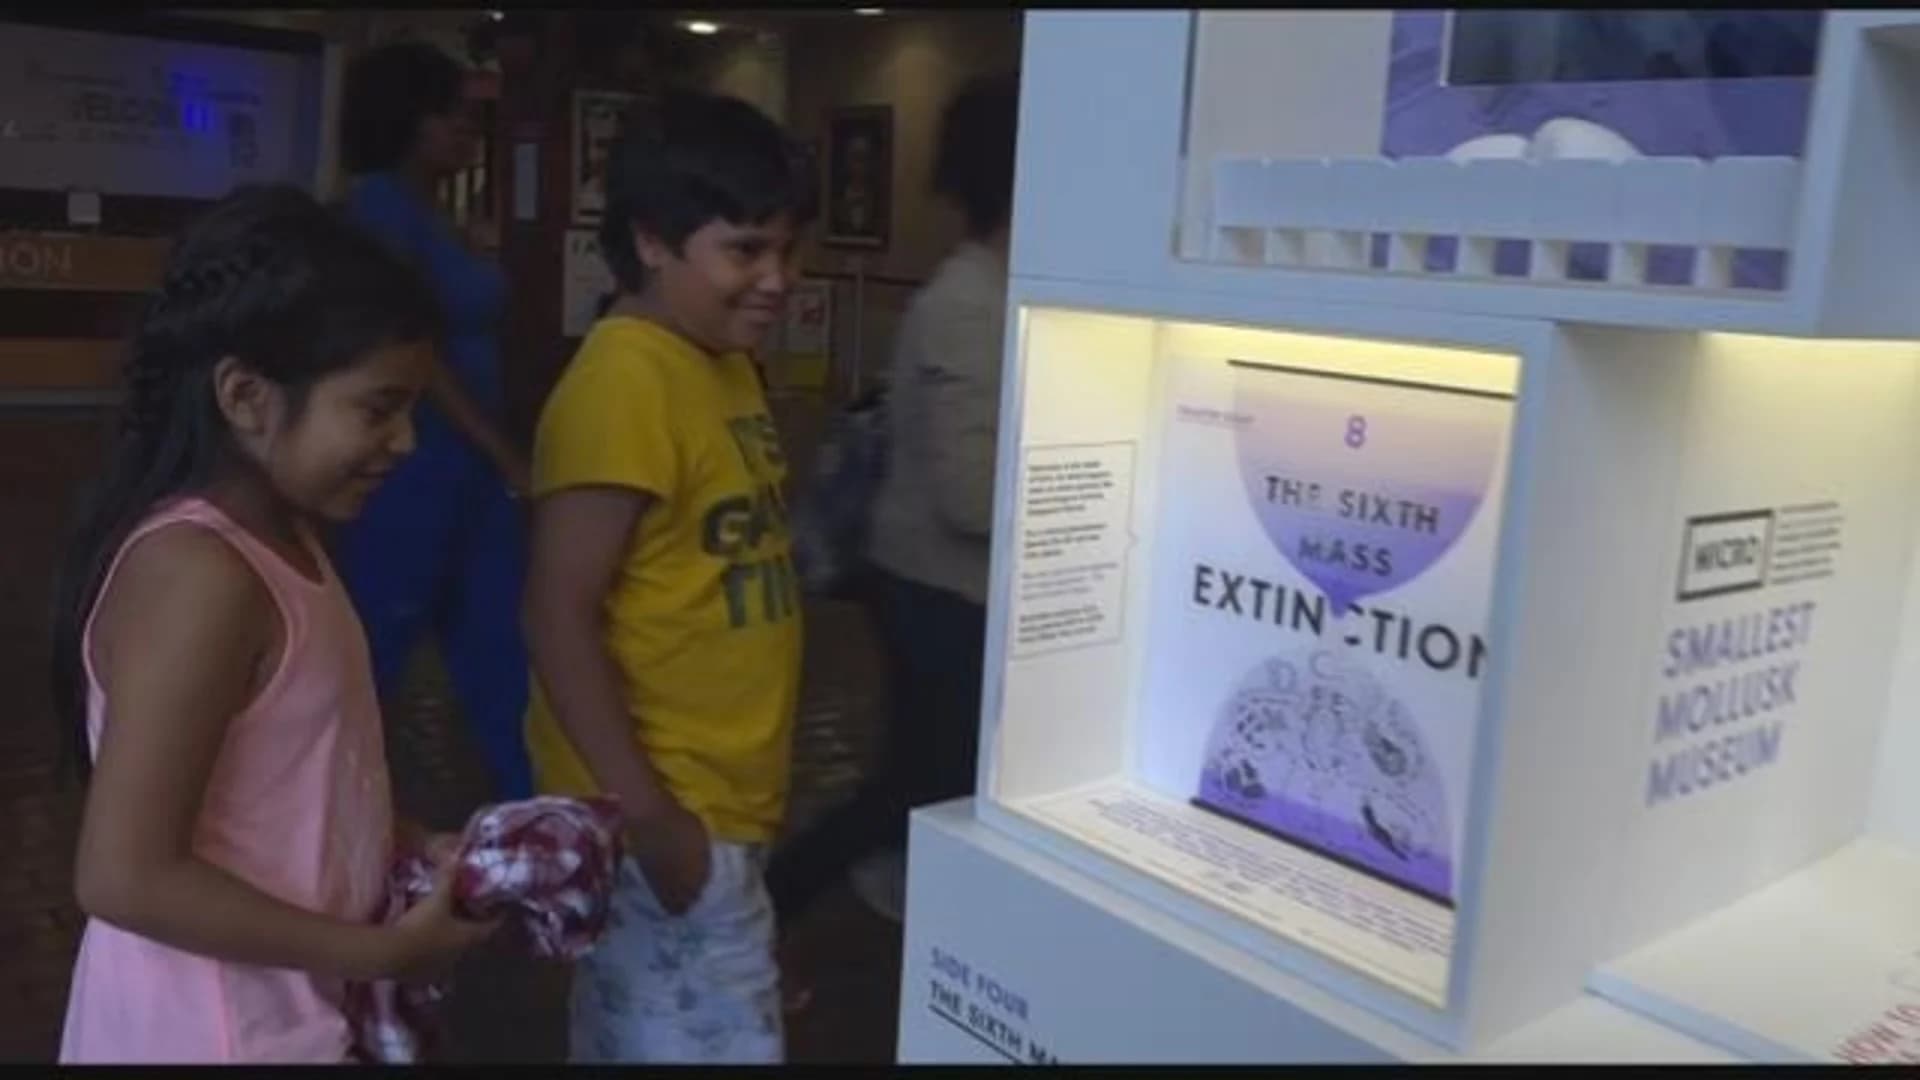 Mini museum offers look into marine biology